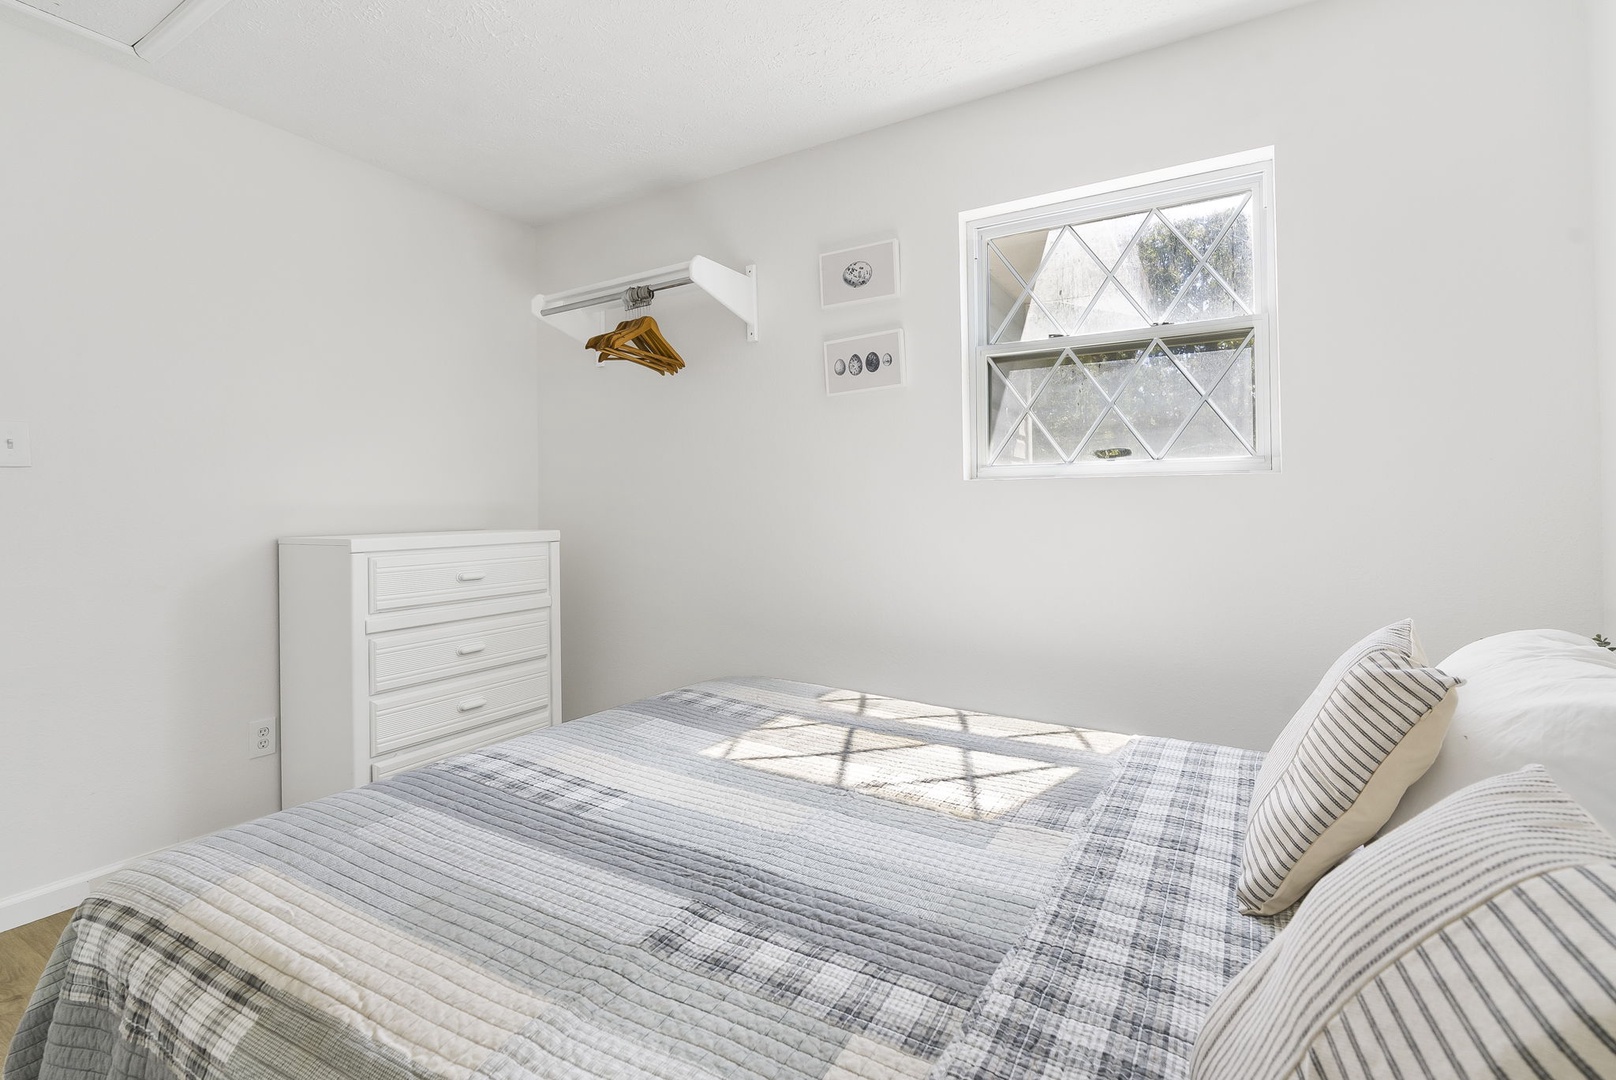 The 1st of 3 bedrooms on the second floor offers a queen bed